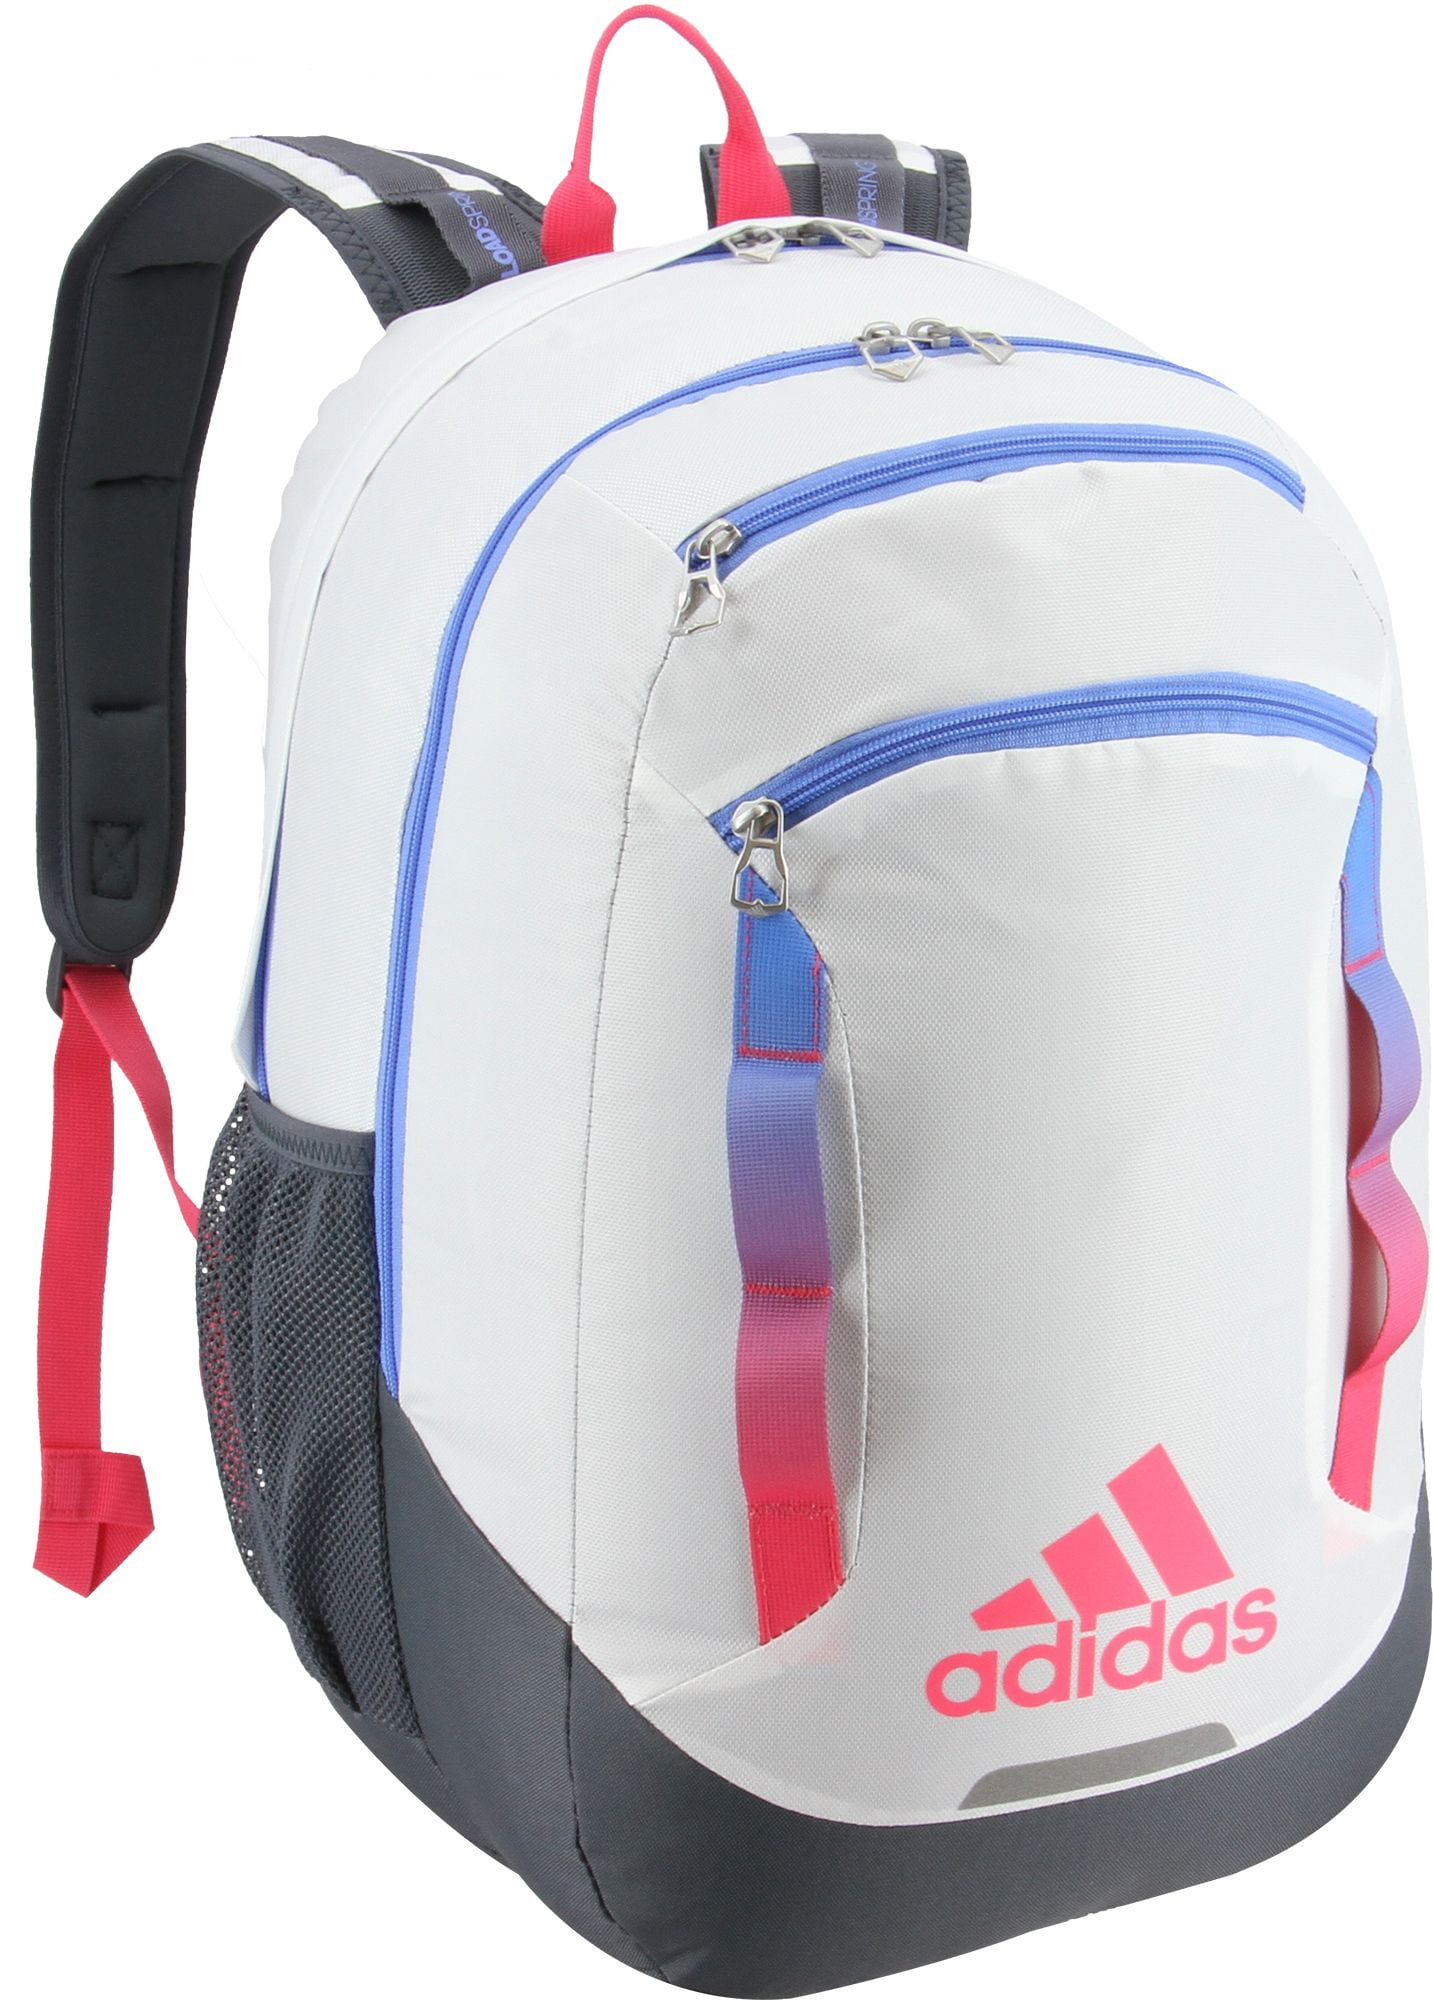 adidas rival backpack review